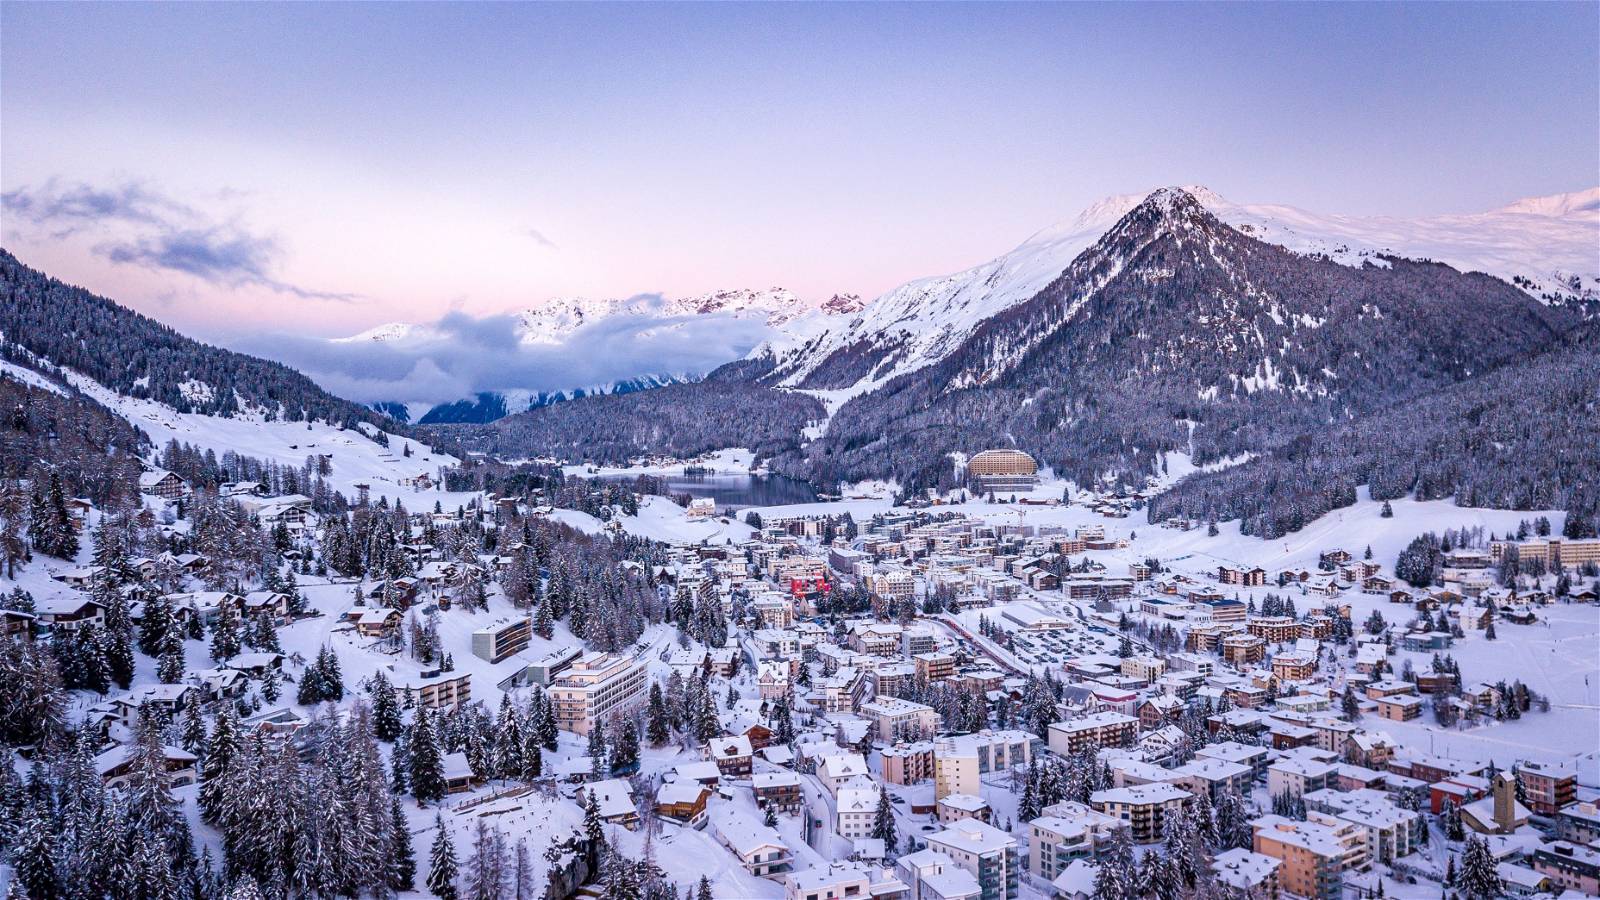 The insiders’ guide to the best events at this year’s Davos Economic Forum